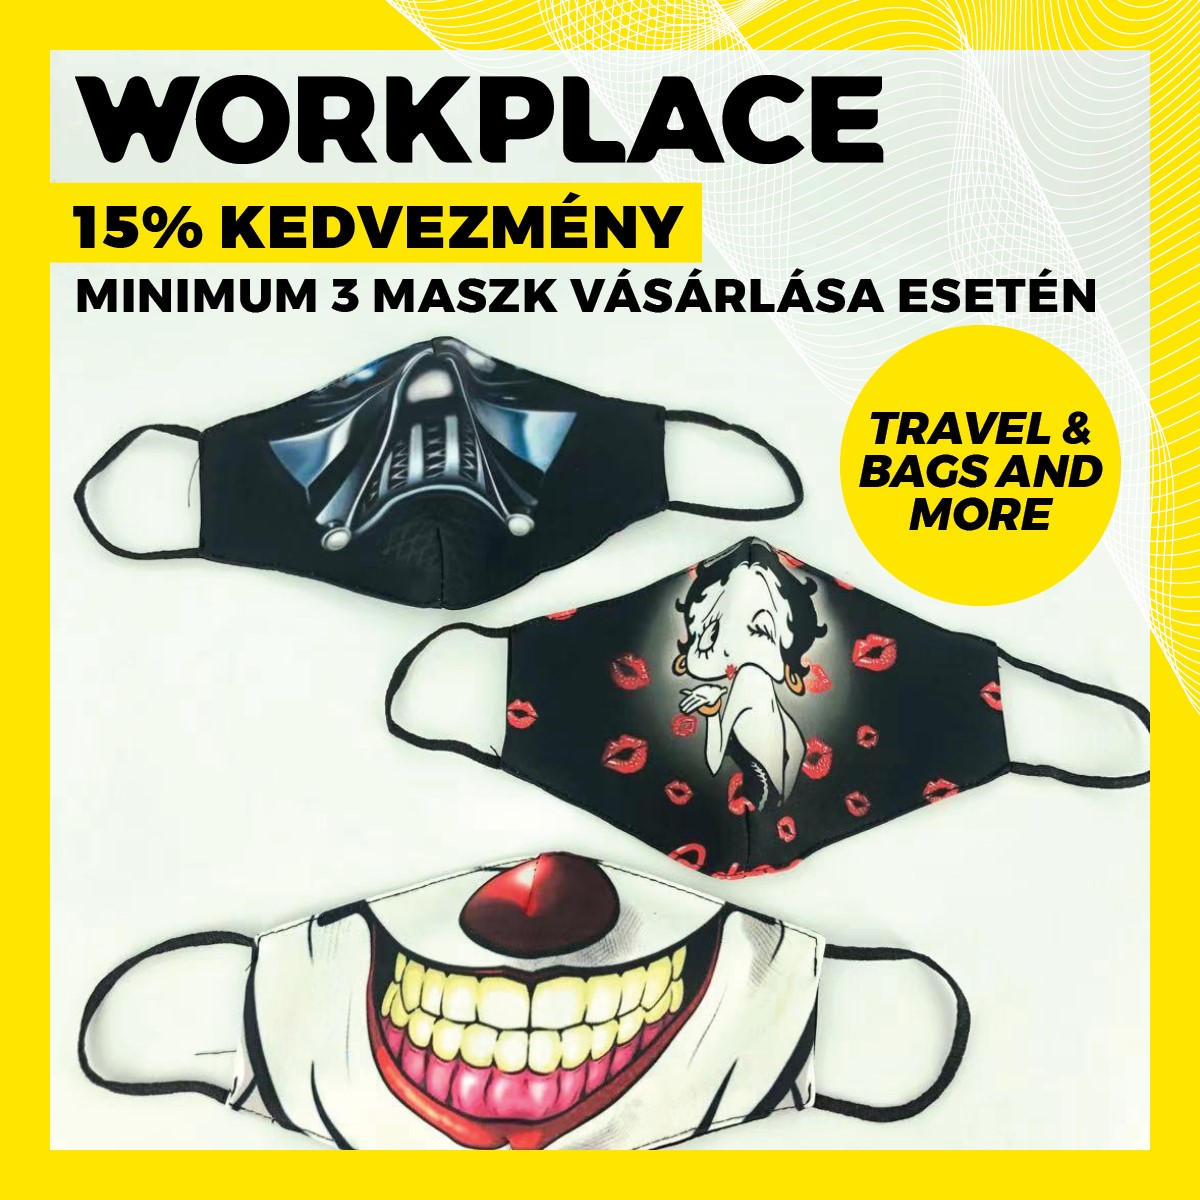 Keresd a Westend appban a Workplace kupont